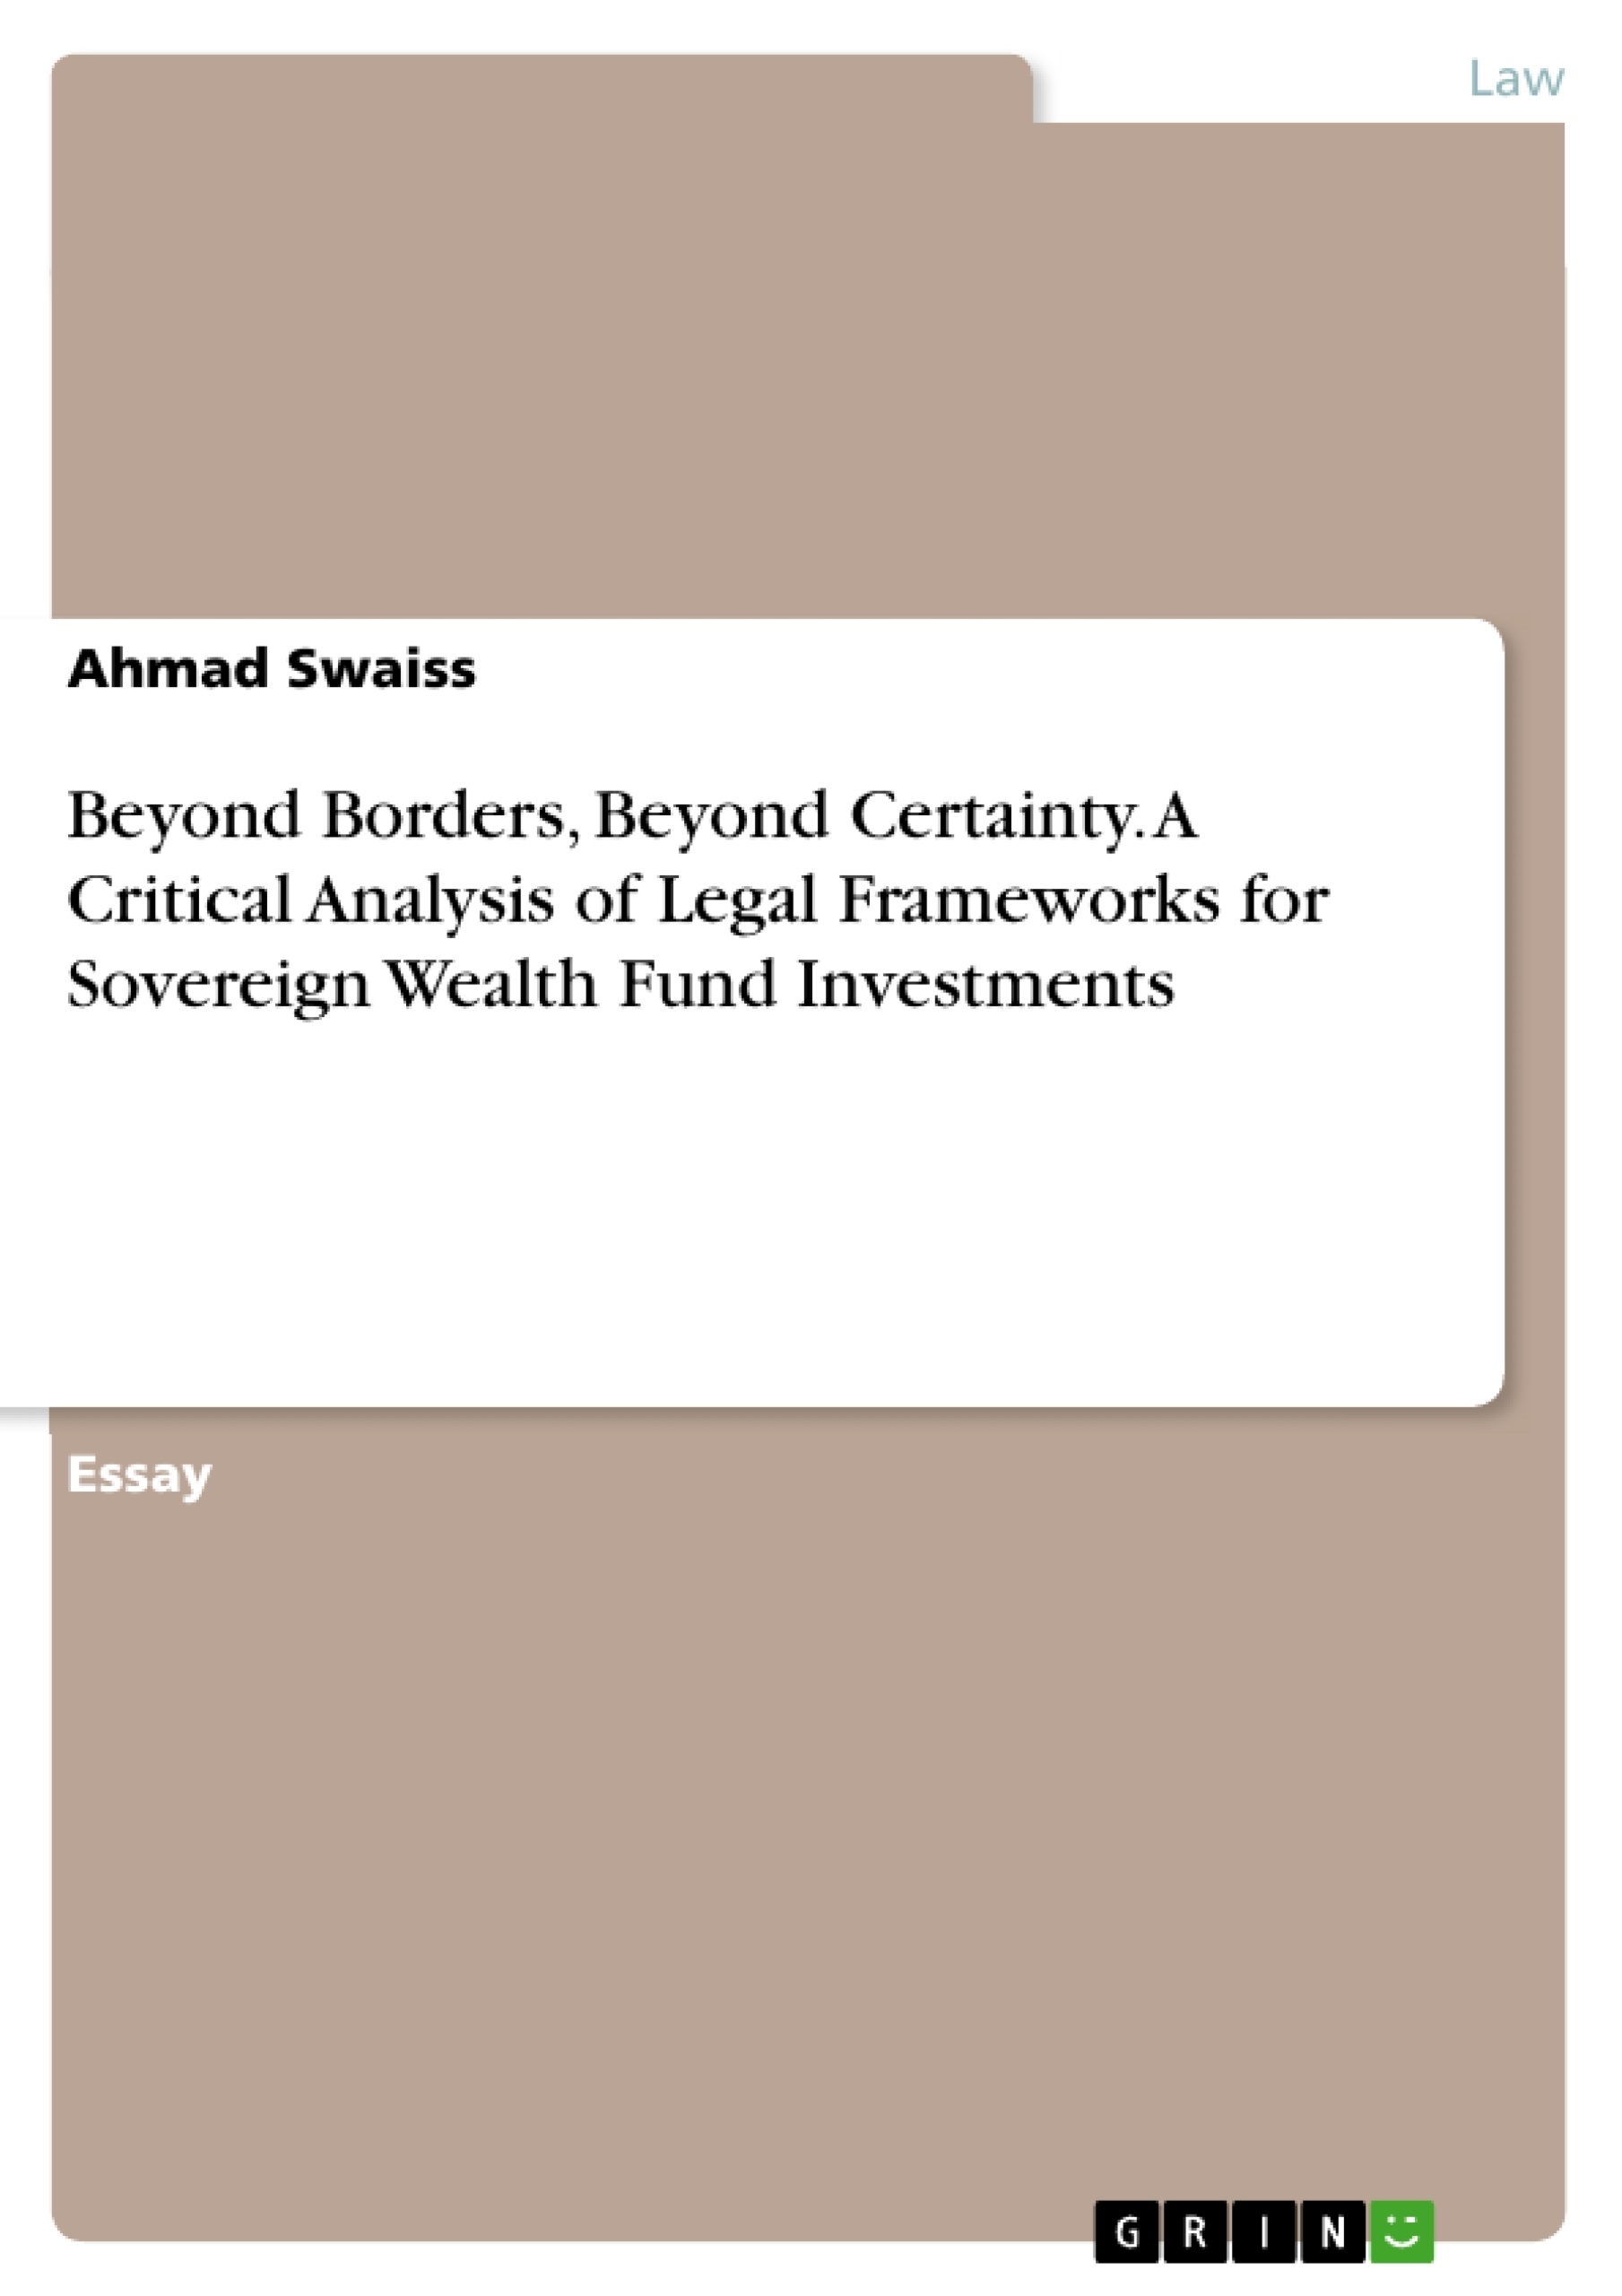 Title: Beyond Borders, Beyond Certainty. A Critical Analysis of Legal Frameworks for Sovereign Wealth Fund Investments